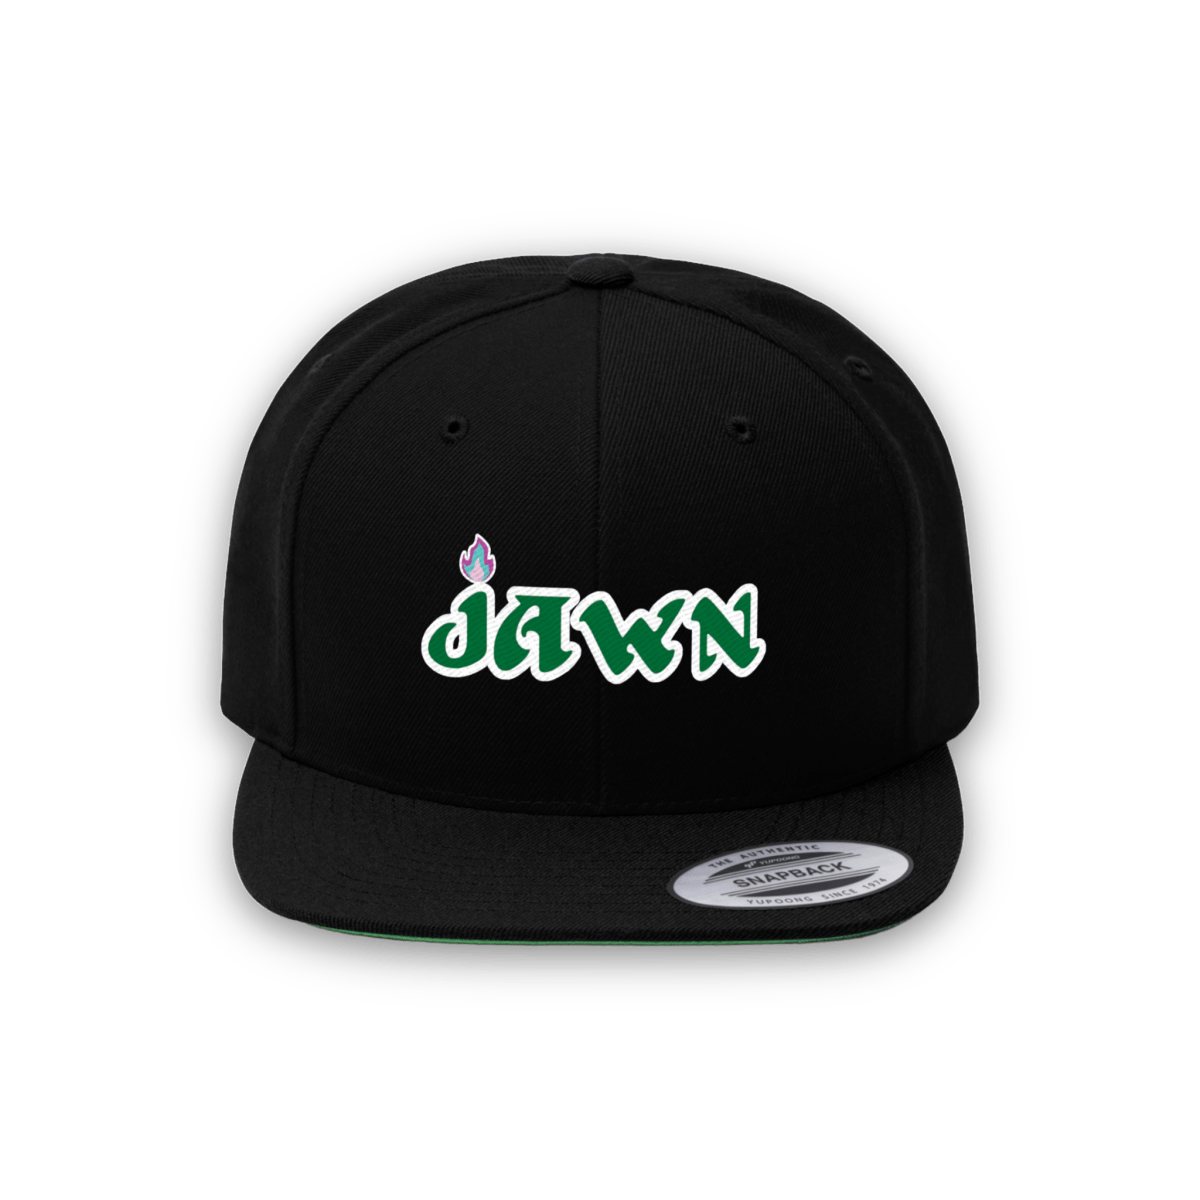 Philadelphia Eagles JAWNS Embroidered Flat Bill Black Hat - Hats - Jawns On Fire - Jawns on Fire